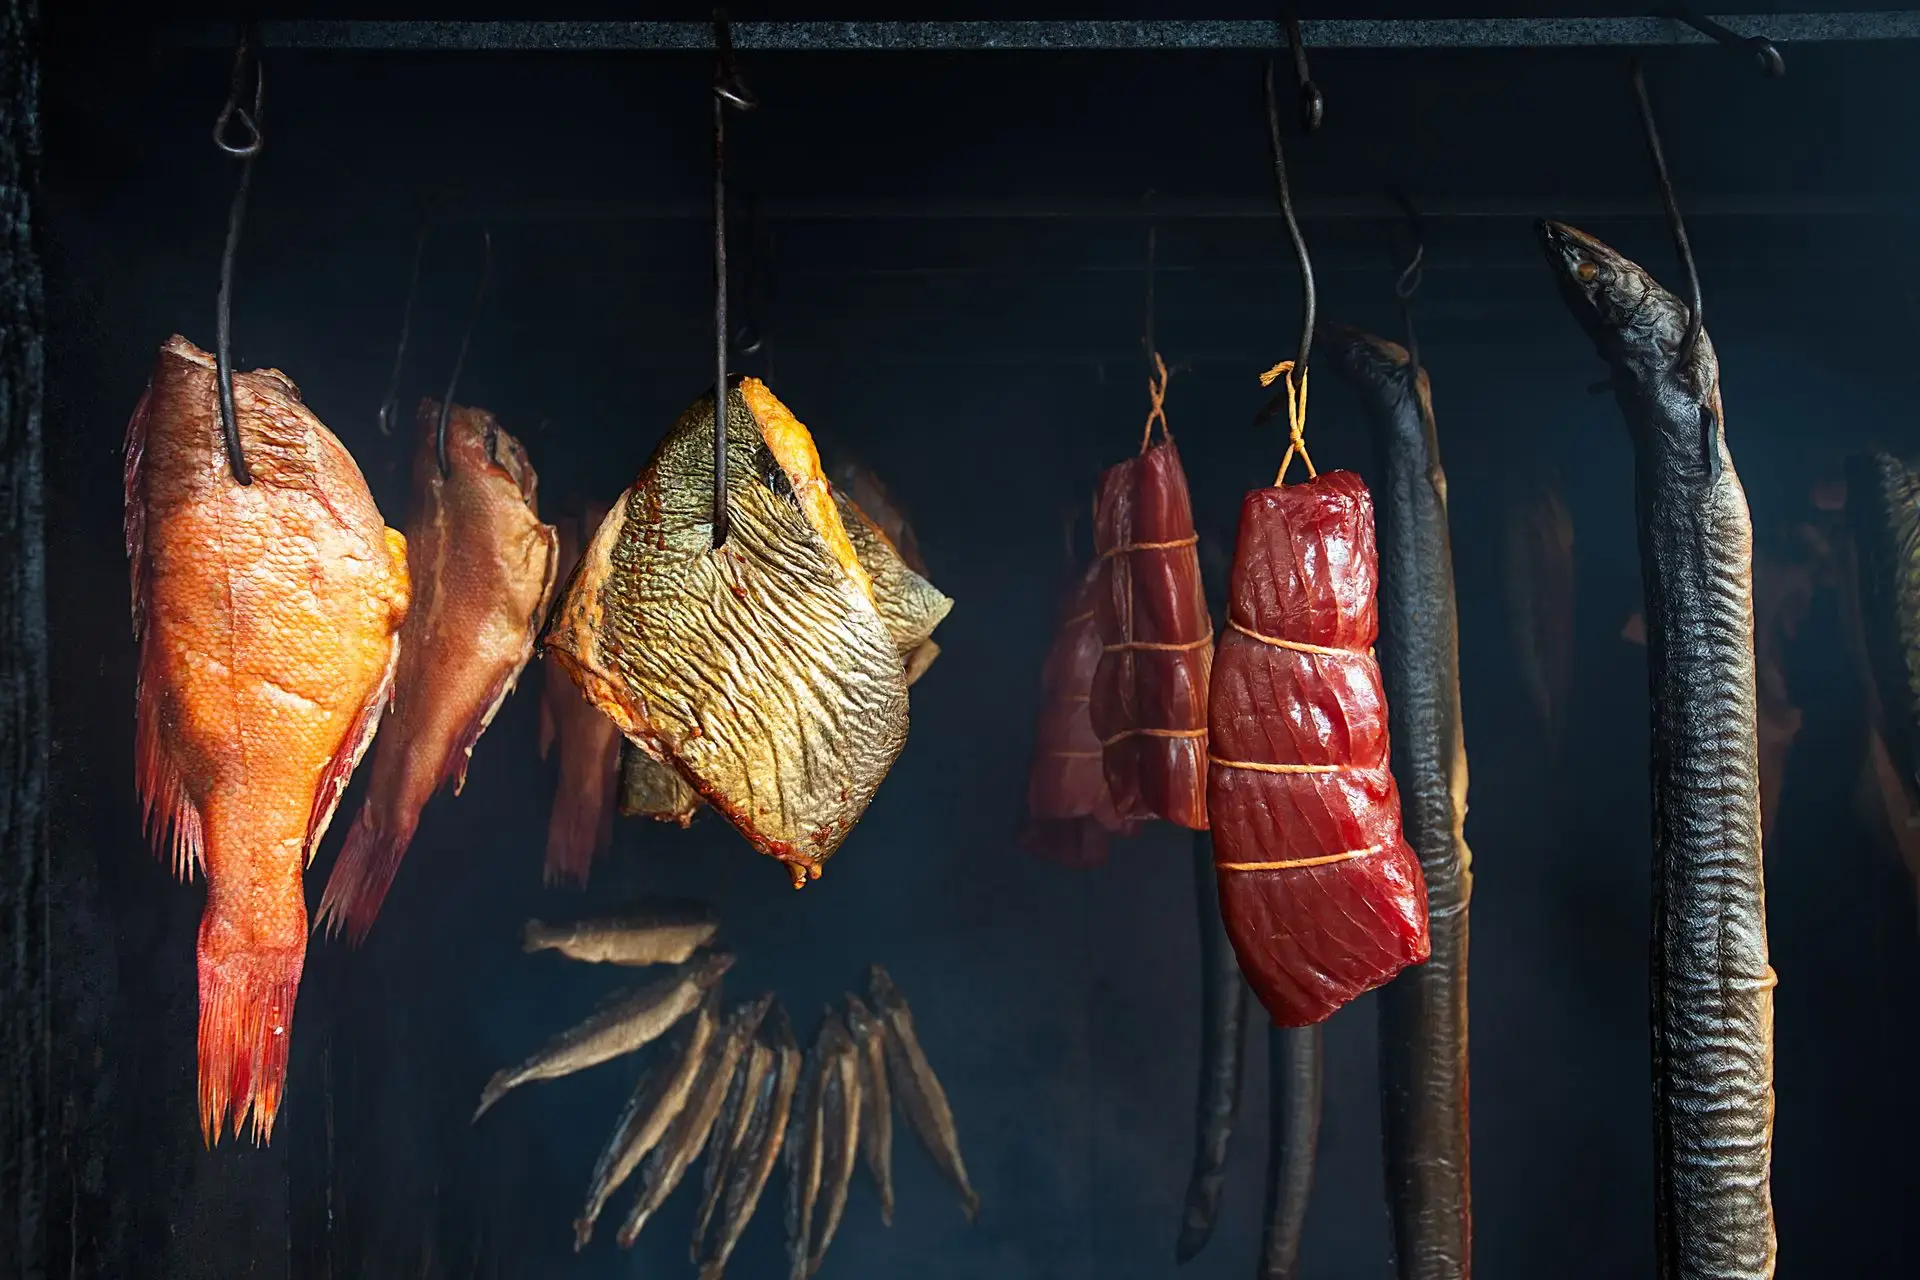 In the mood for something smoky? With an electric smoker you can feast on smoked fish and meat all year round